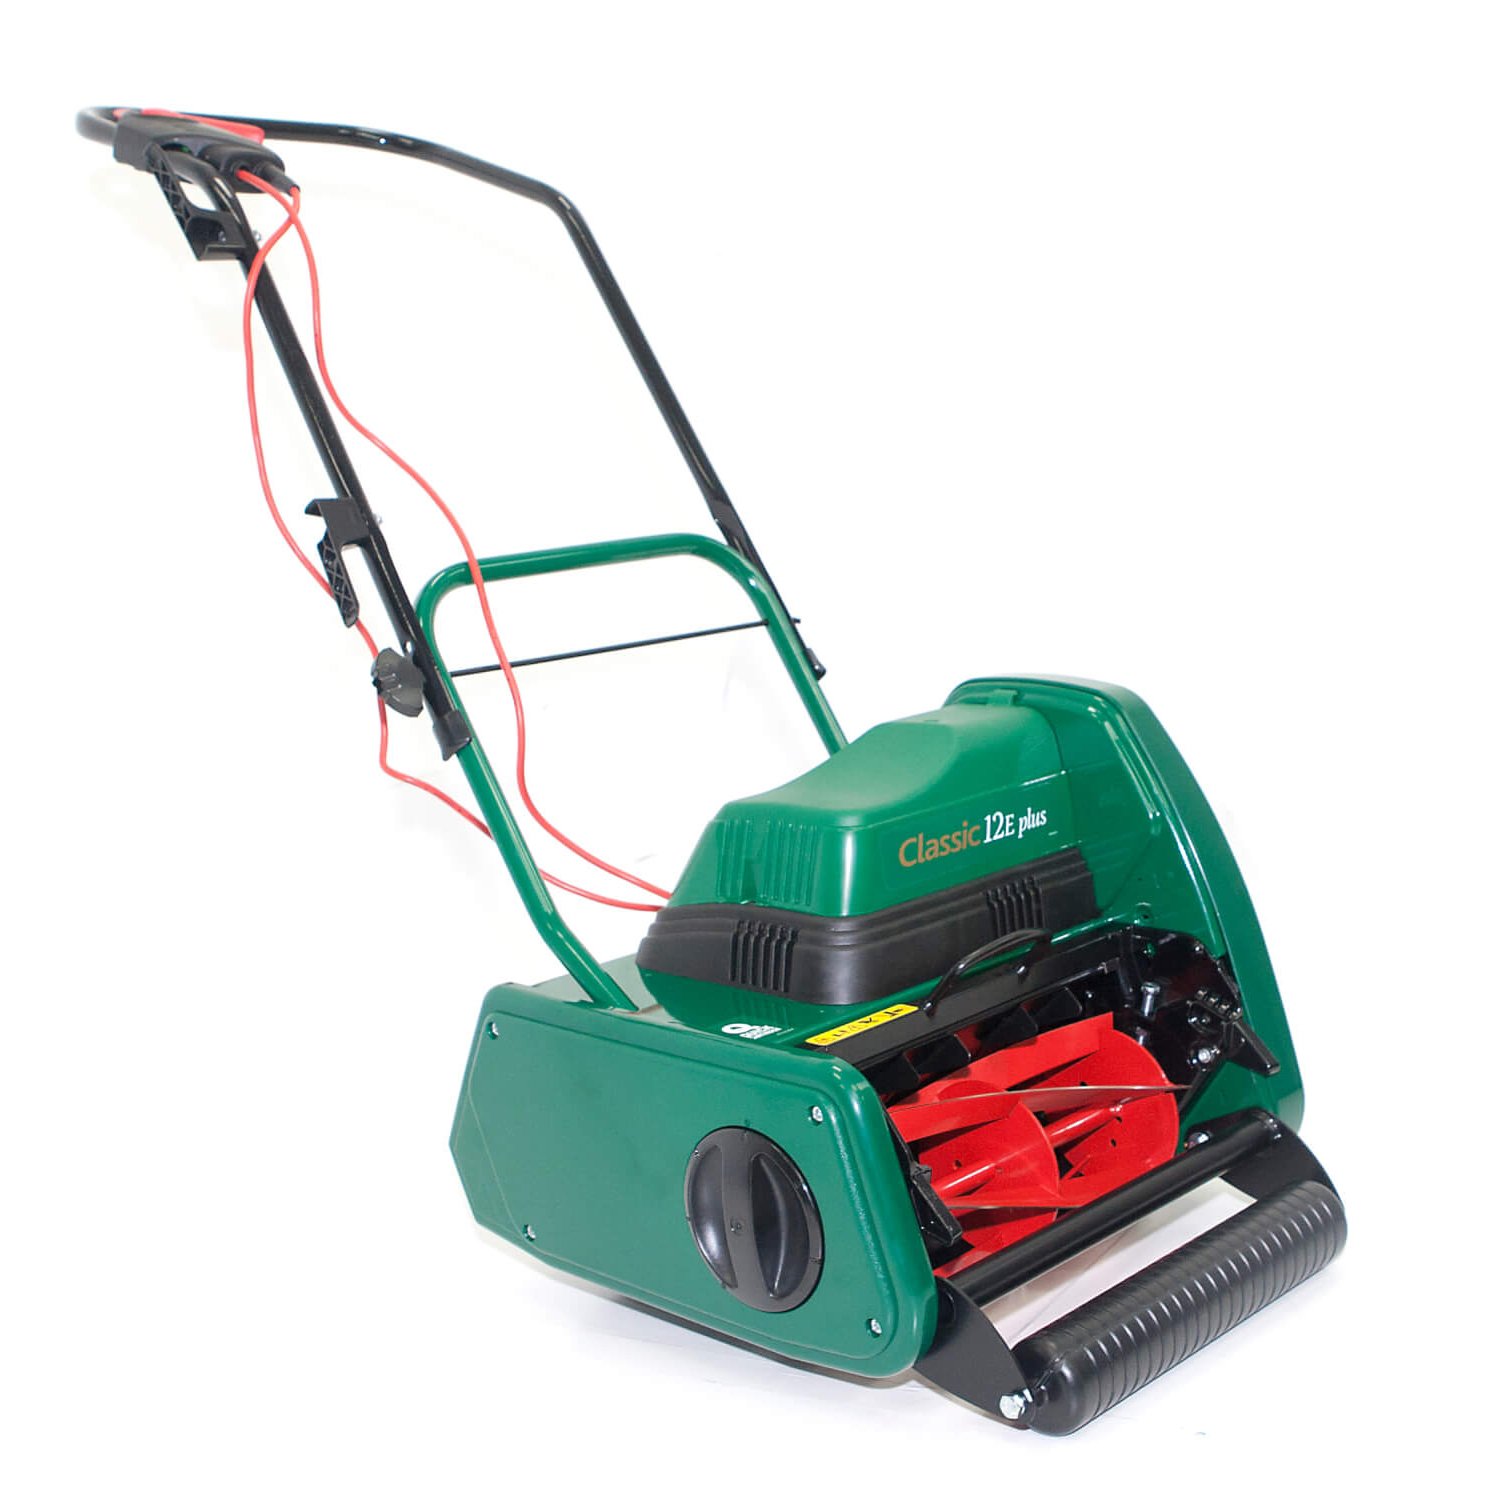 ALLETT CLASSIC ELECTRIC POWERED CYLINDER LAWNMOWER (12E PLUS)